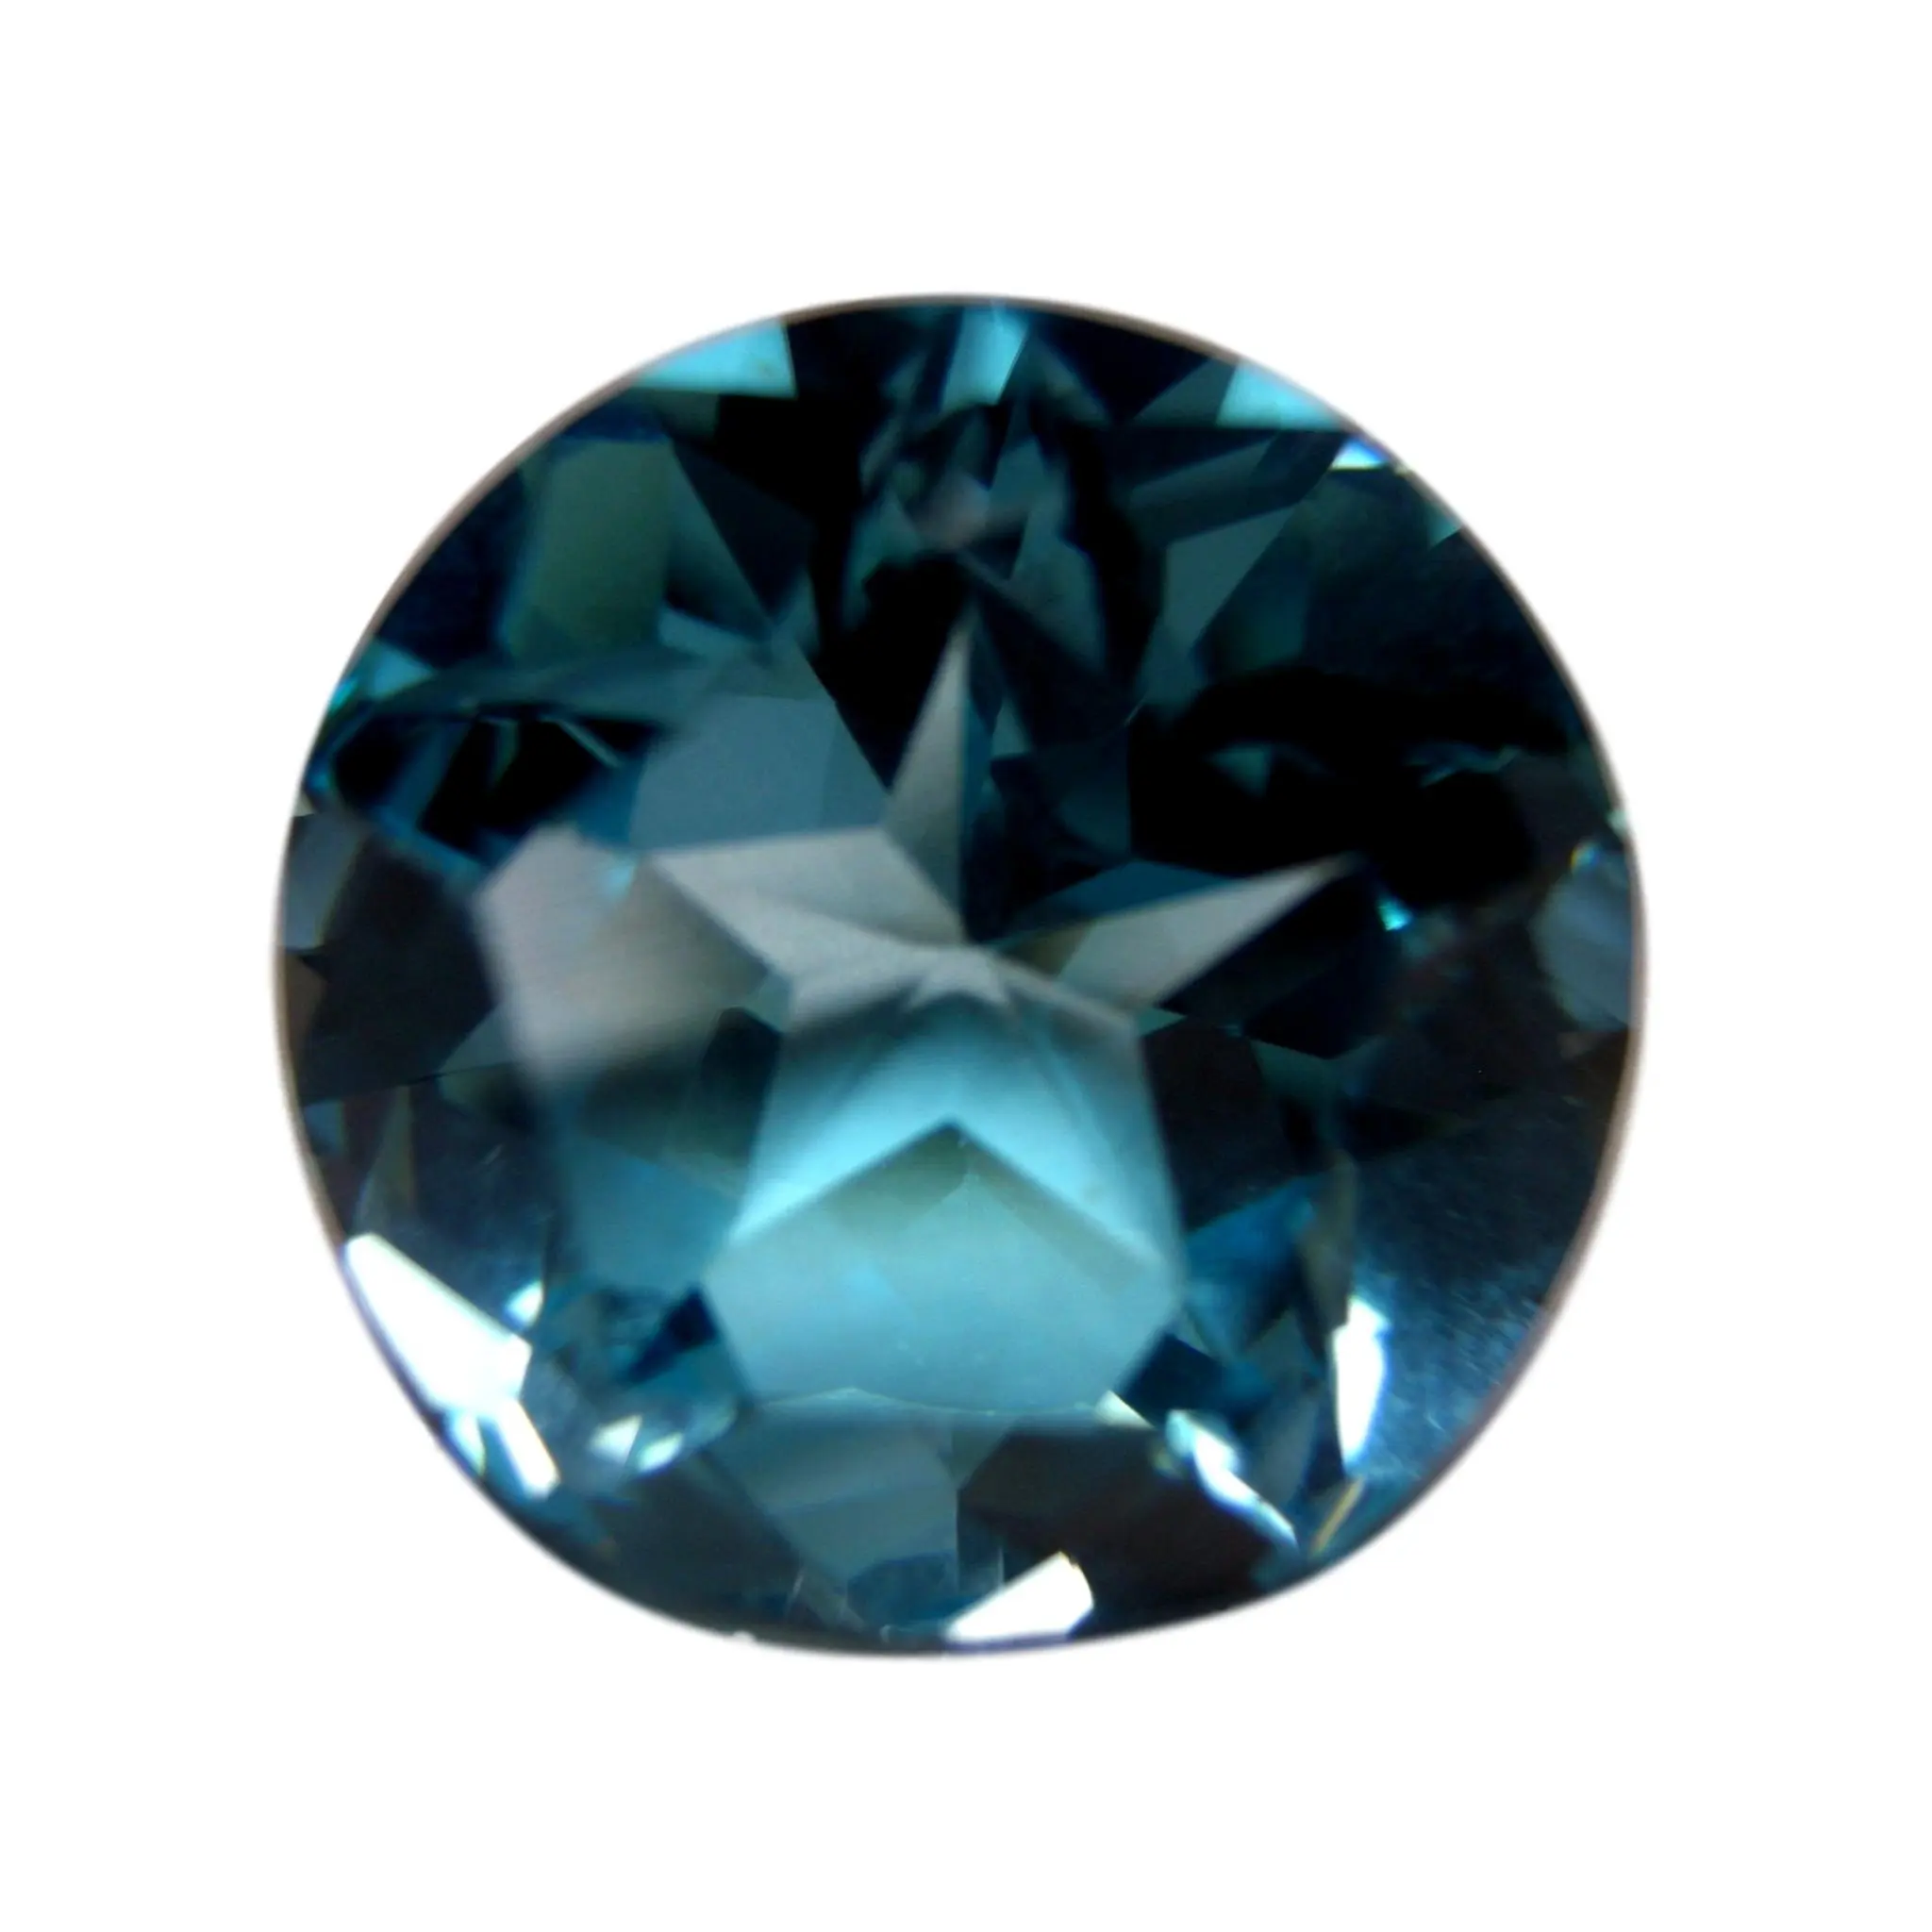 Faceted Star Cut London Blue Topaz Gemstone Custom Cutting All Shapes And Sizes Cut On Custom Orders In Wholesale Prices In All